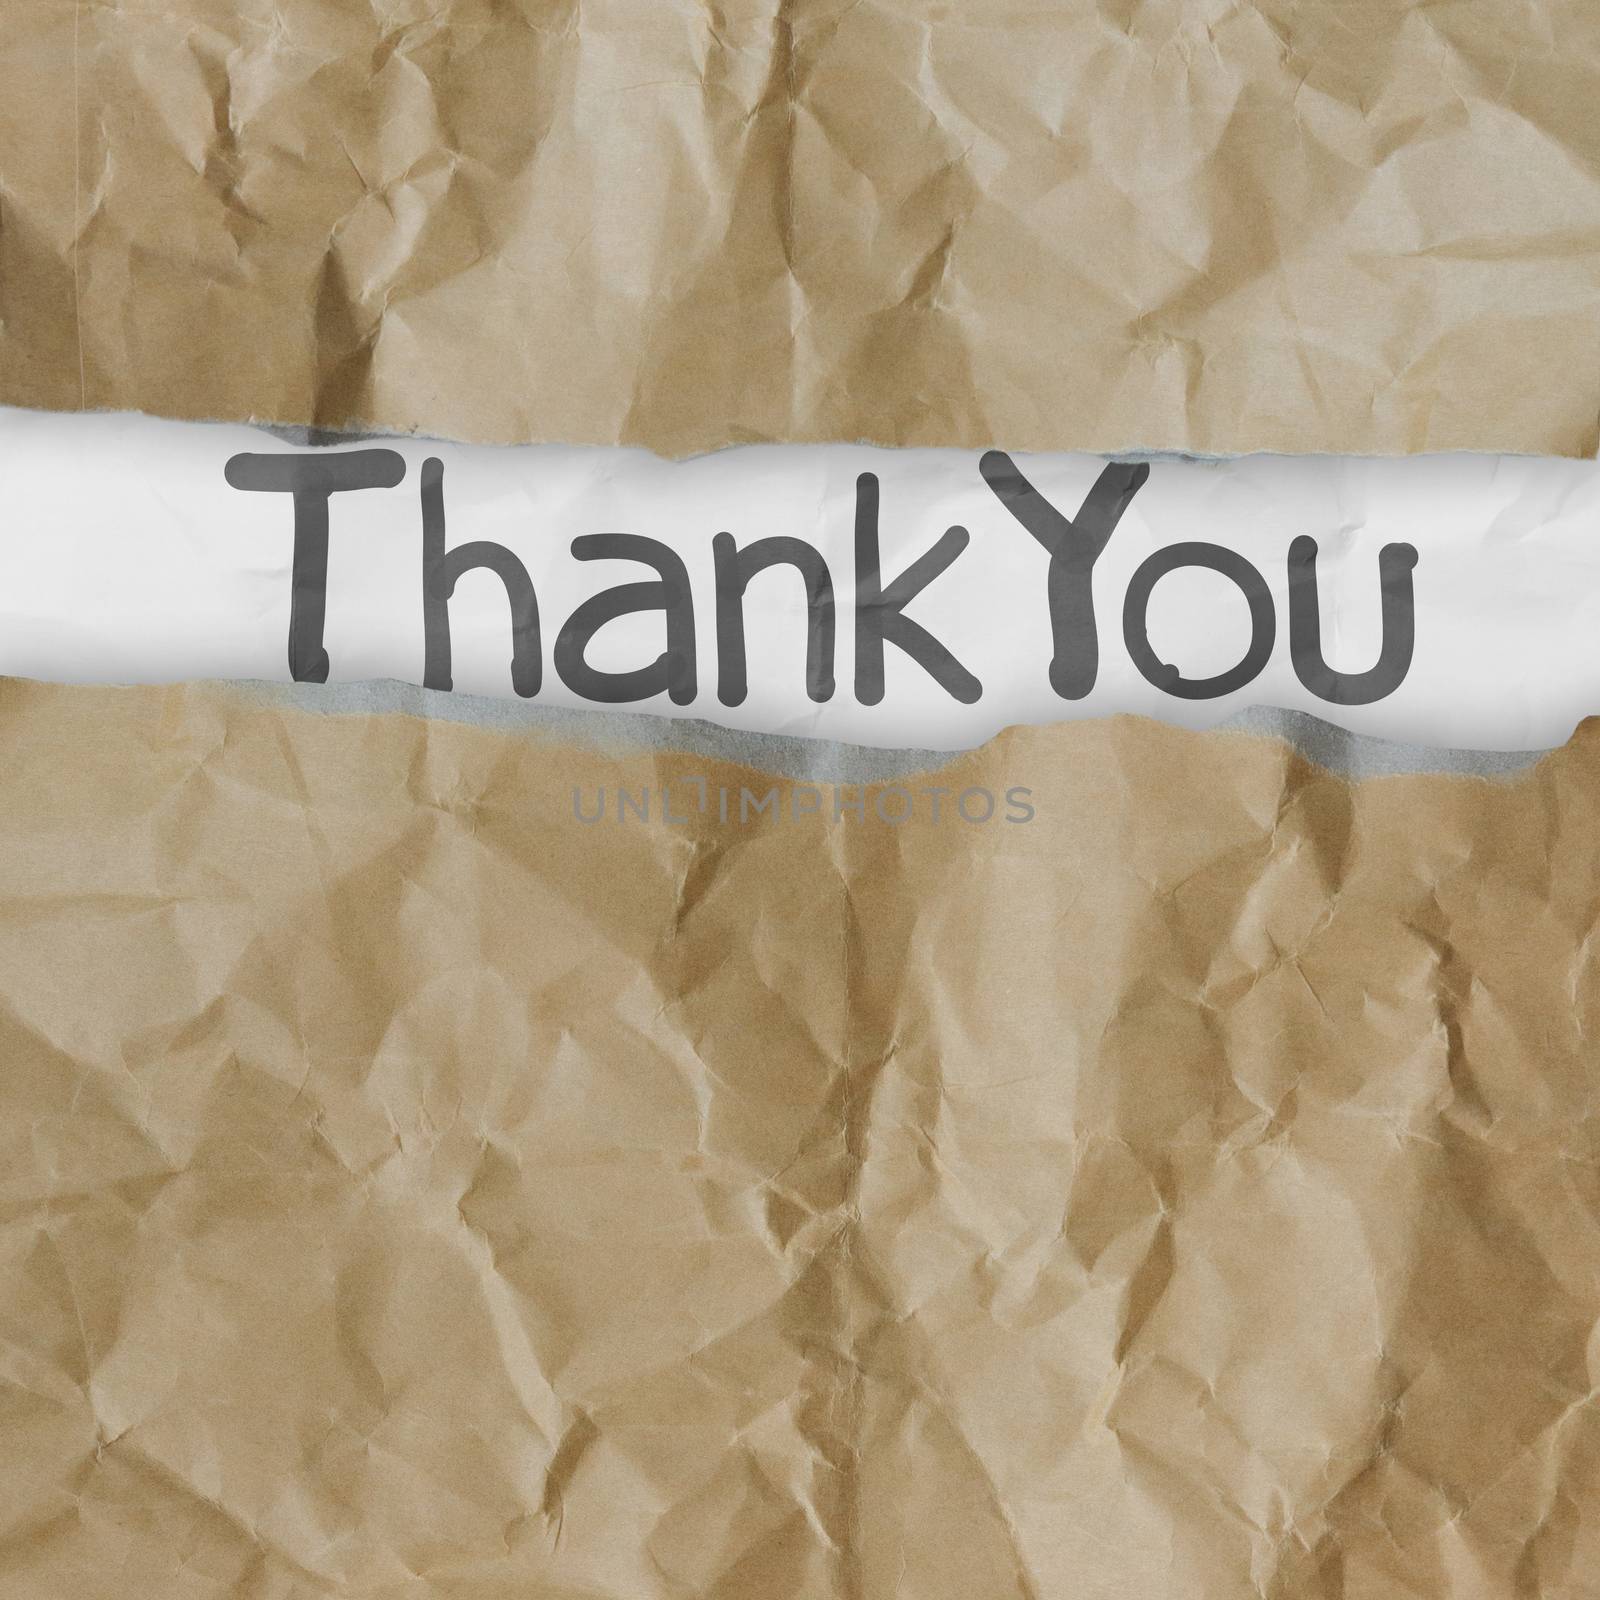 hand drawn thank you words on crumpled paper with tear envelope as concept